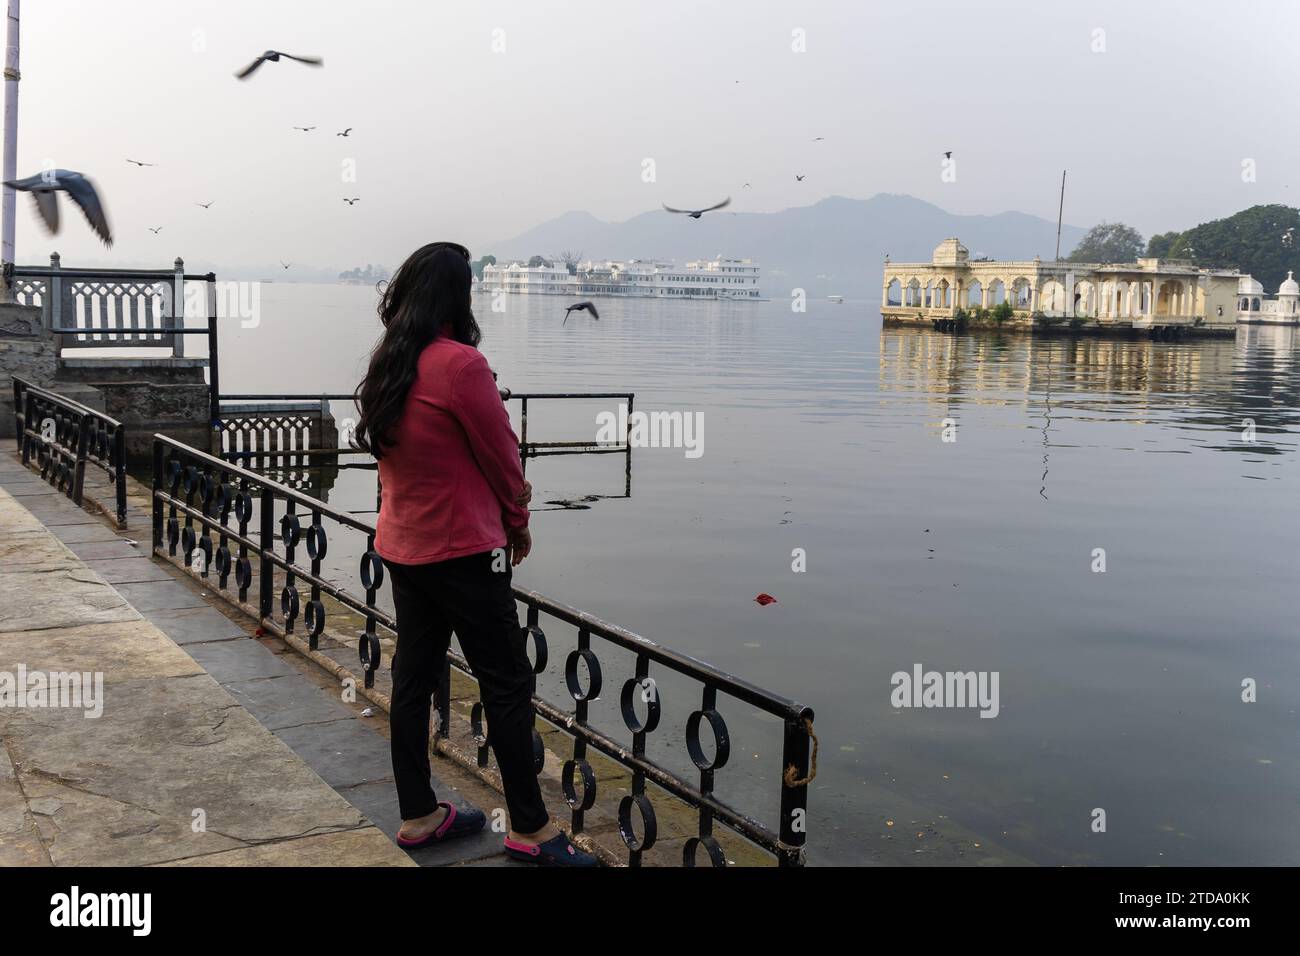 young girl looking at mountain lake city landscape with blurred pigeons at morning image is taken at Jagdish Temple udaipur rajasthan india. Stock Photo